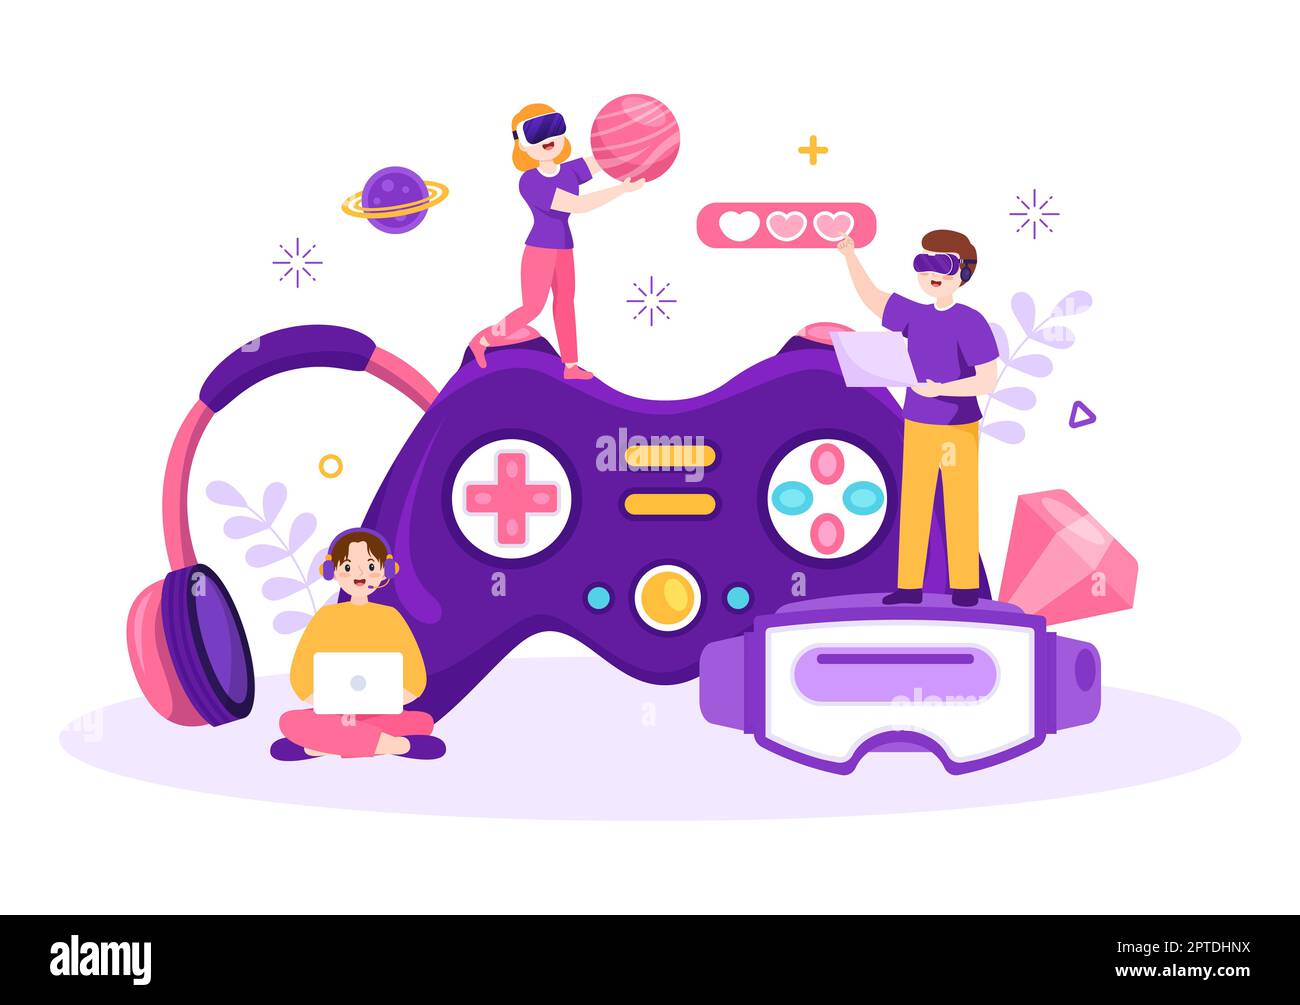 Video Game with Kids Playing Gamepad Controllers Fighting Console on Android Mobile Computer in Flat Cartoon Hand Drawn Template Illustration Stock Photo